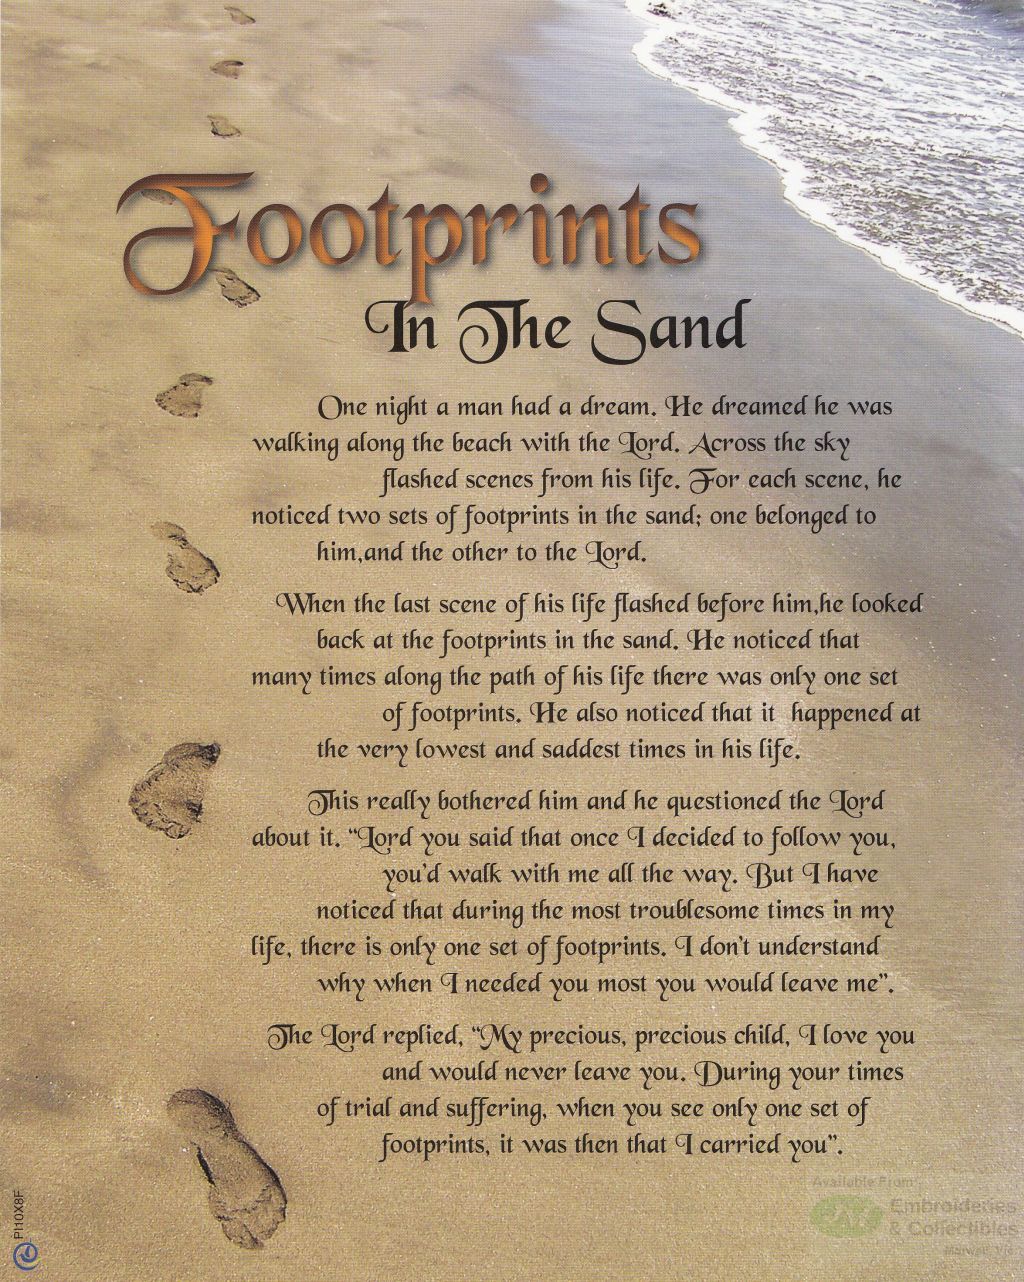 footprints-in-the-sand-religious-print-10-x-8-200mm-x-250mm